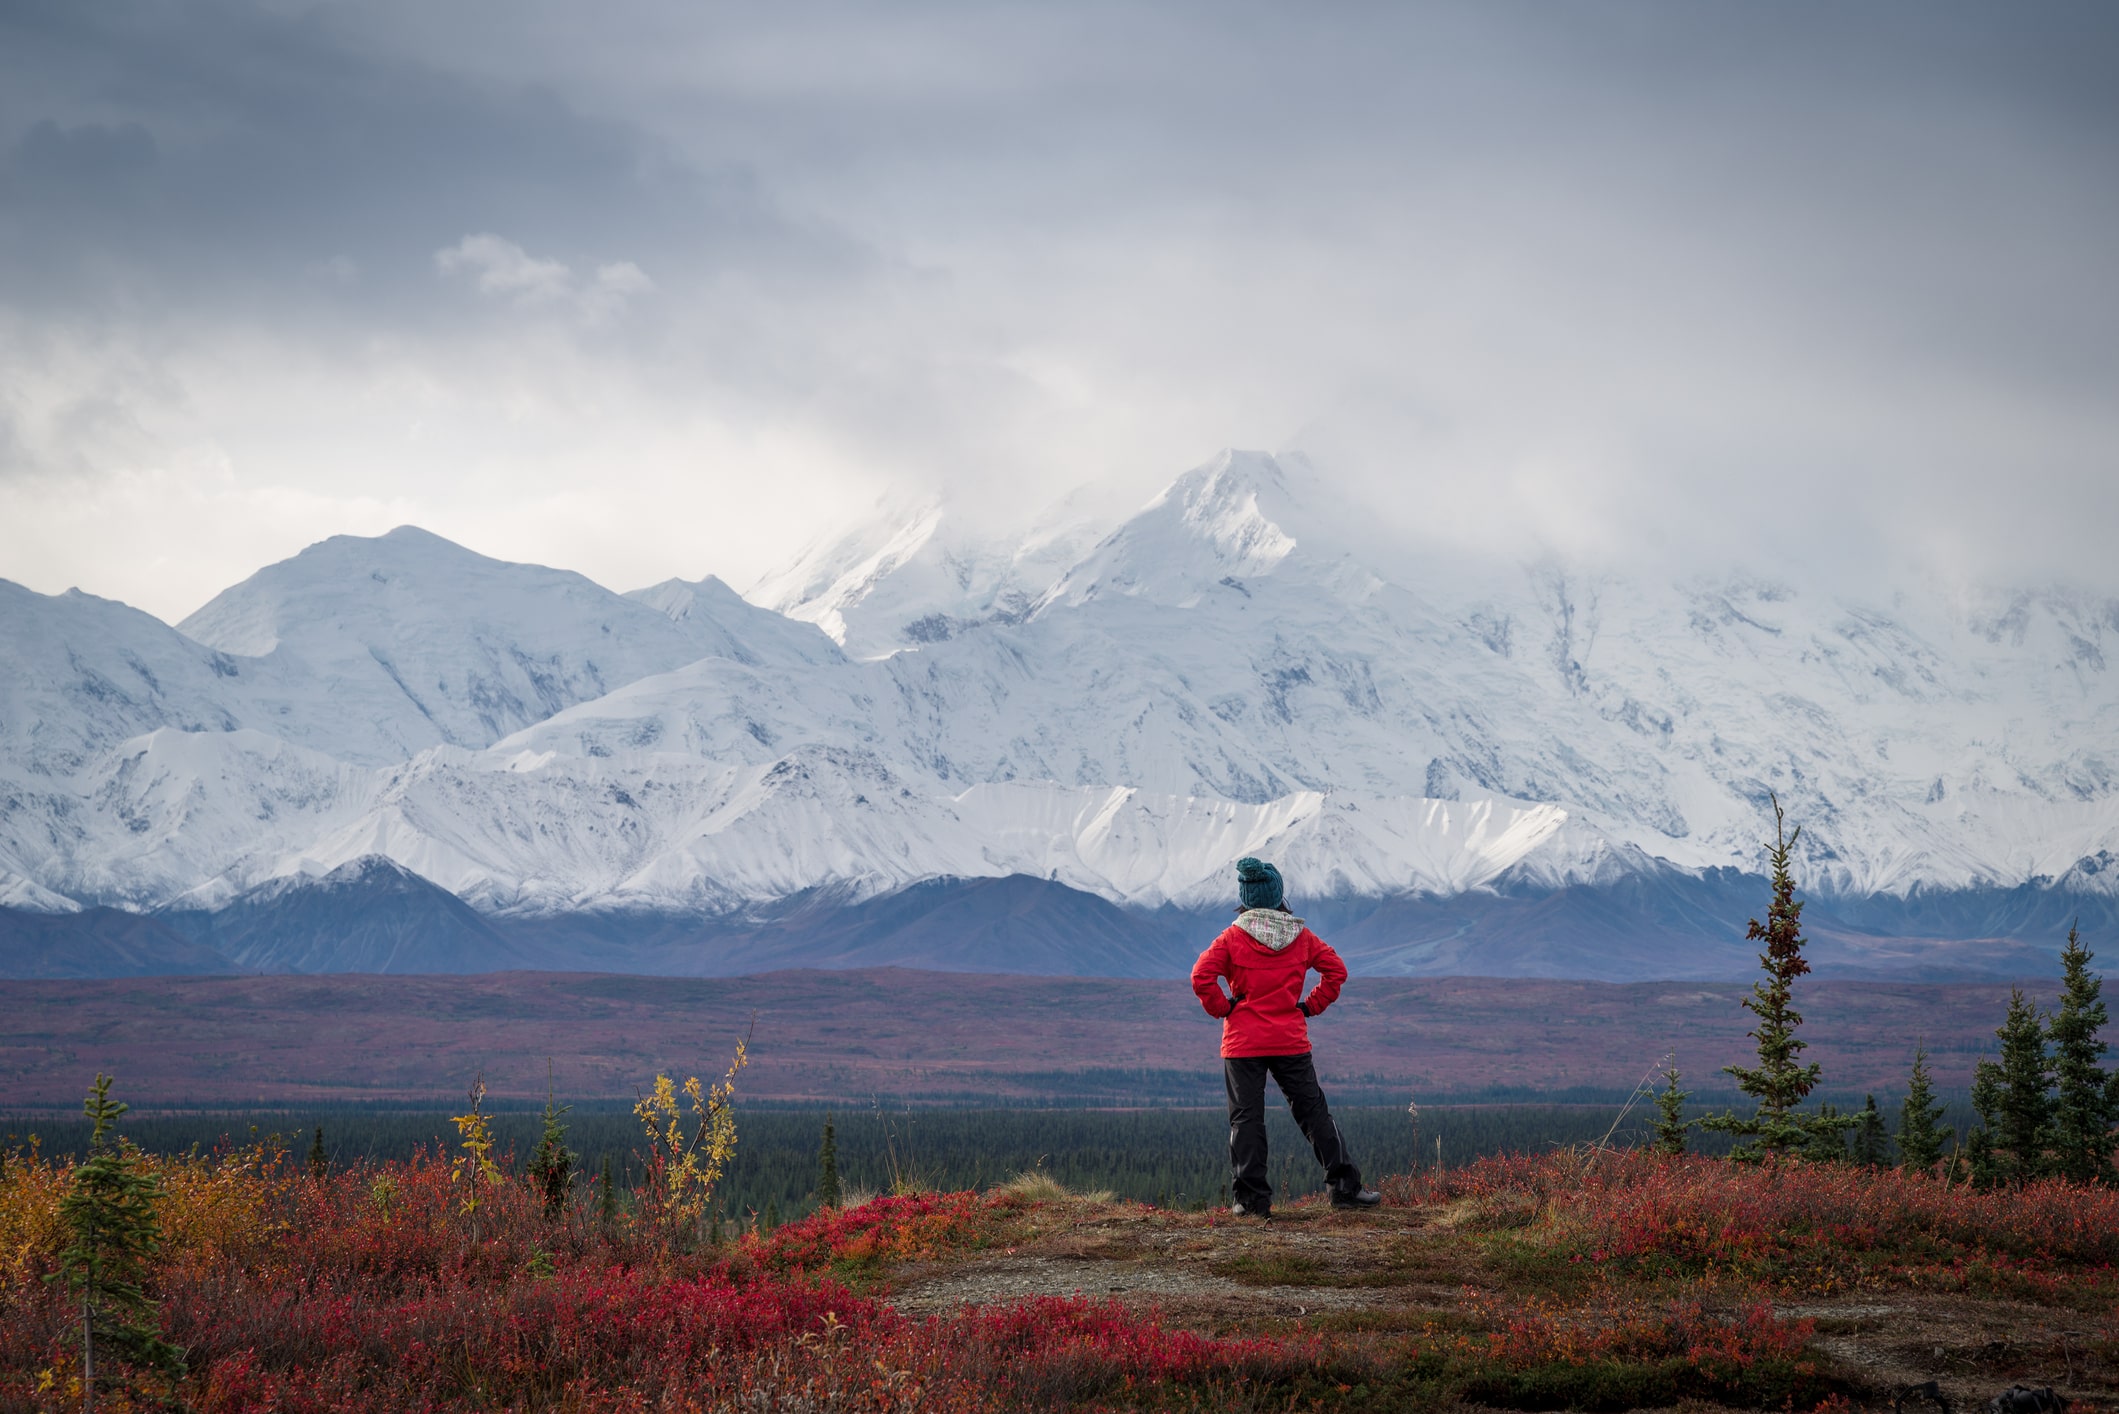 Hiker at mountain top with view of the Denali Mountain.